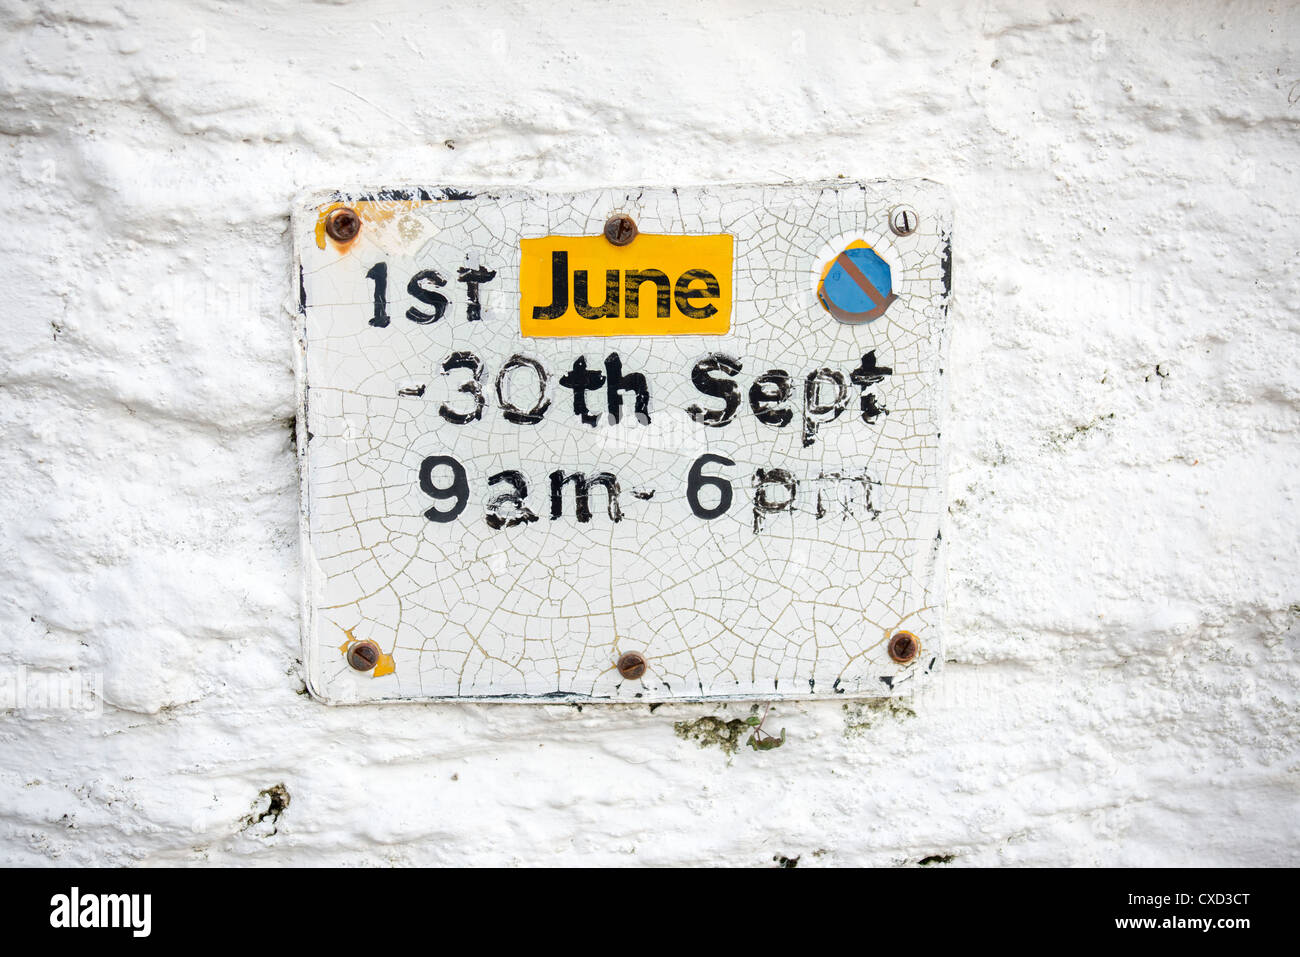 A parking restriction sign in Portloe Cornwall, crazed from years of use with repairs to the word June  - a 'distressed' look Stock Photo